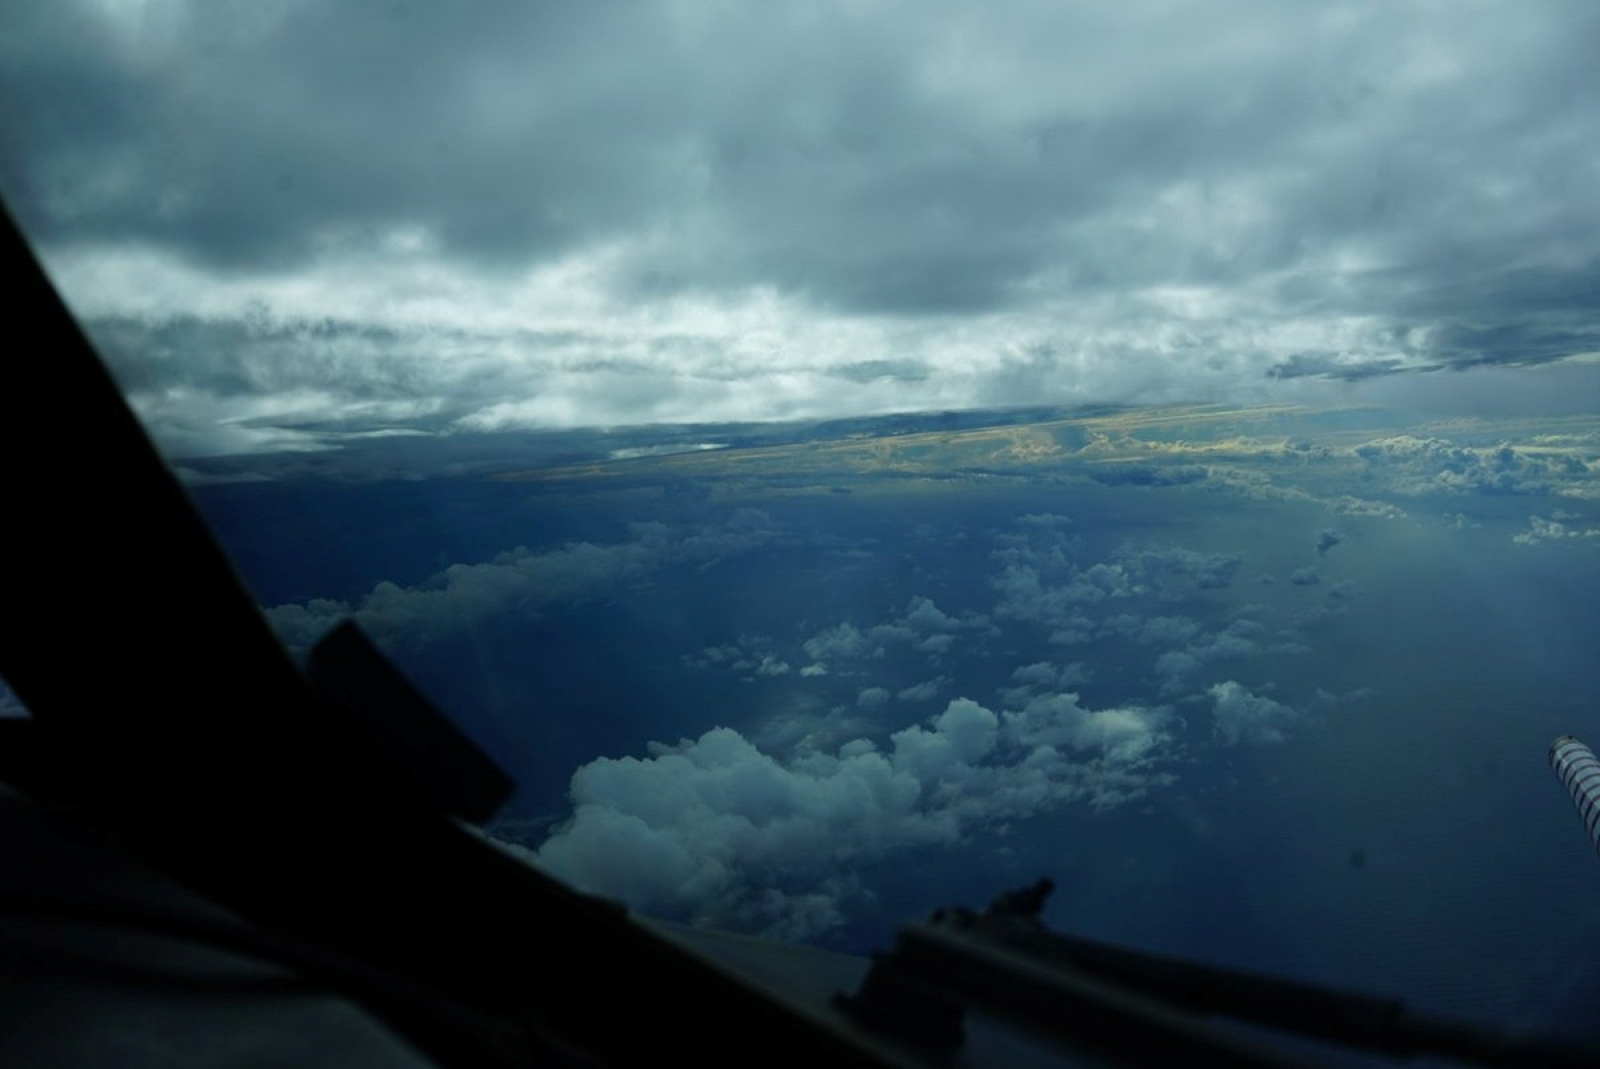 Hurricane Dorian is seen from NOAA-42 WP-3D Orion aircraft during a reconnaissance mission over the Atlantic Ocean Hurricane Dorian is seen from the National Oceanic and Atmospheric Administration NOAA-42 WP-3D Orion aircraft during a reconnaissance mission over the Atlantic Ocean, August 30, 2019 in this handout image obtained from social media. Picture taken August 30, 2019. LCDR Robert Mitchell/NOAA/Handout via REUTERS THIS IMAGE HAS BEEN SUPPLIED BY A THIRD PARTY. NOAA